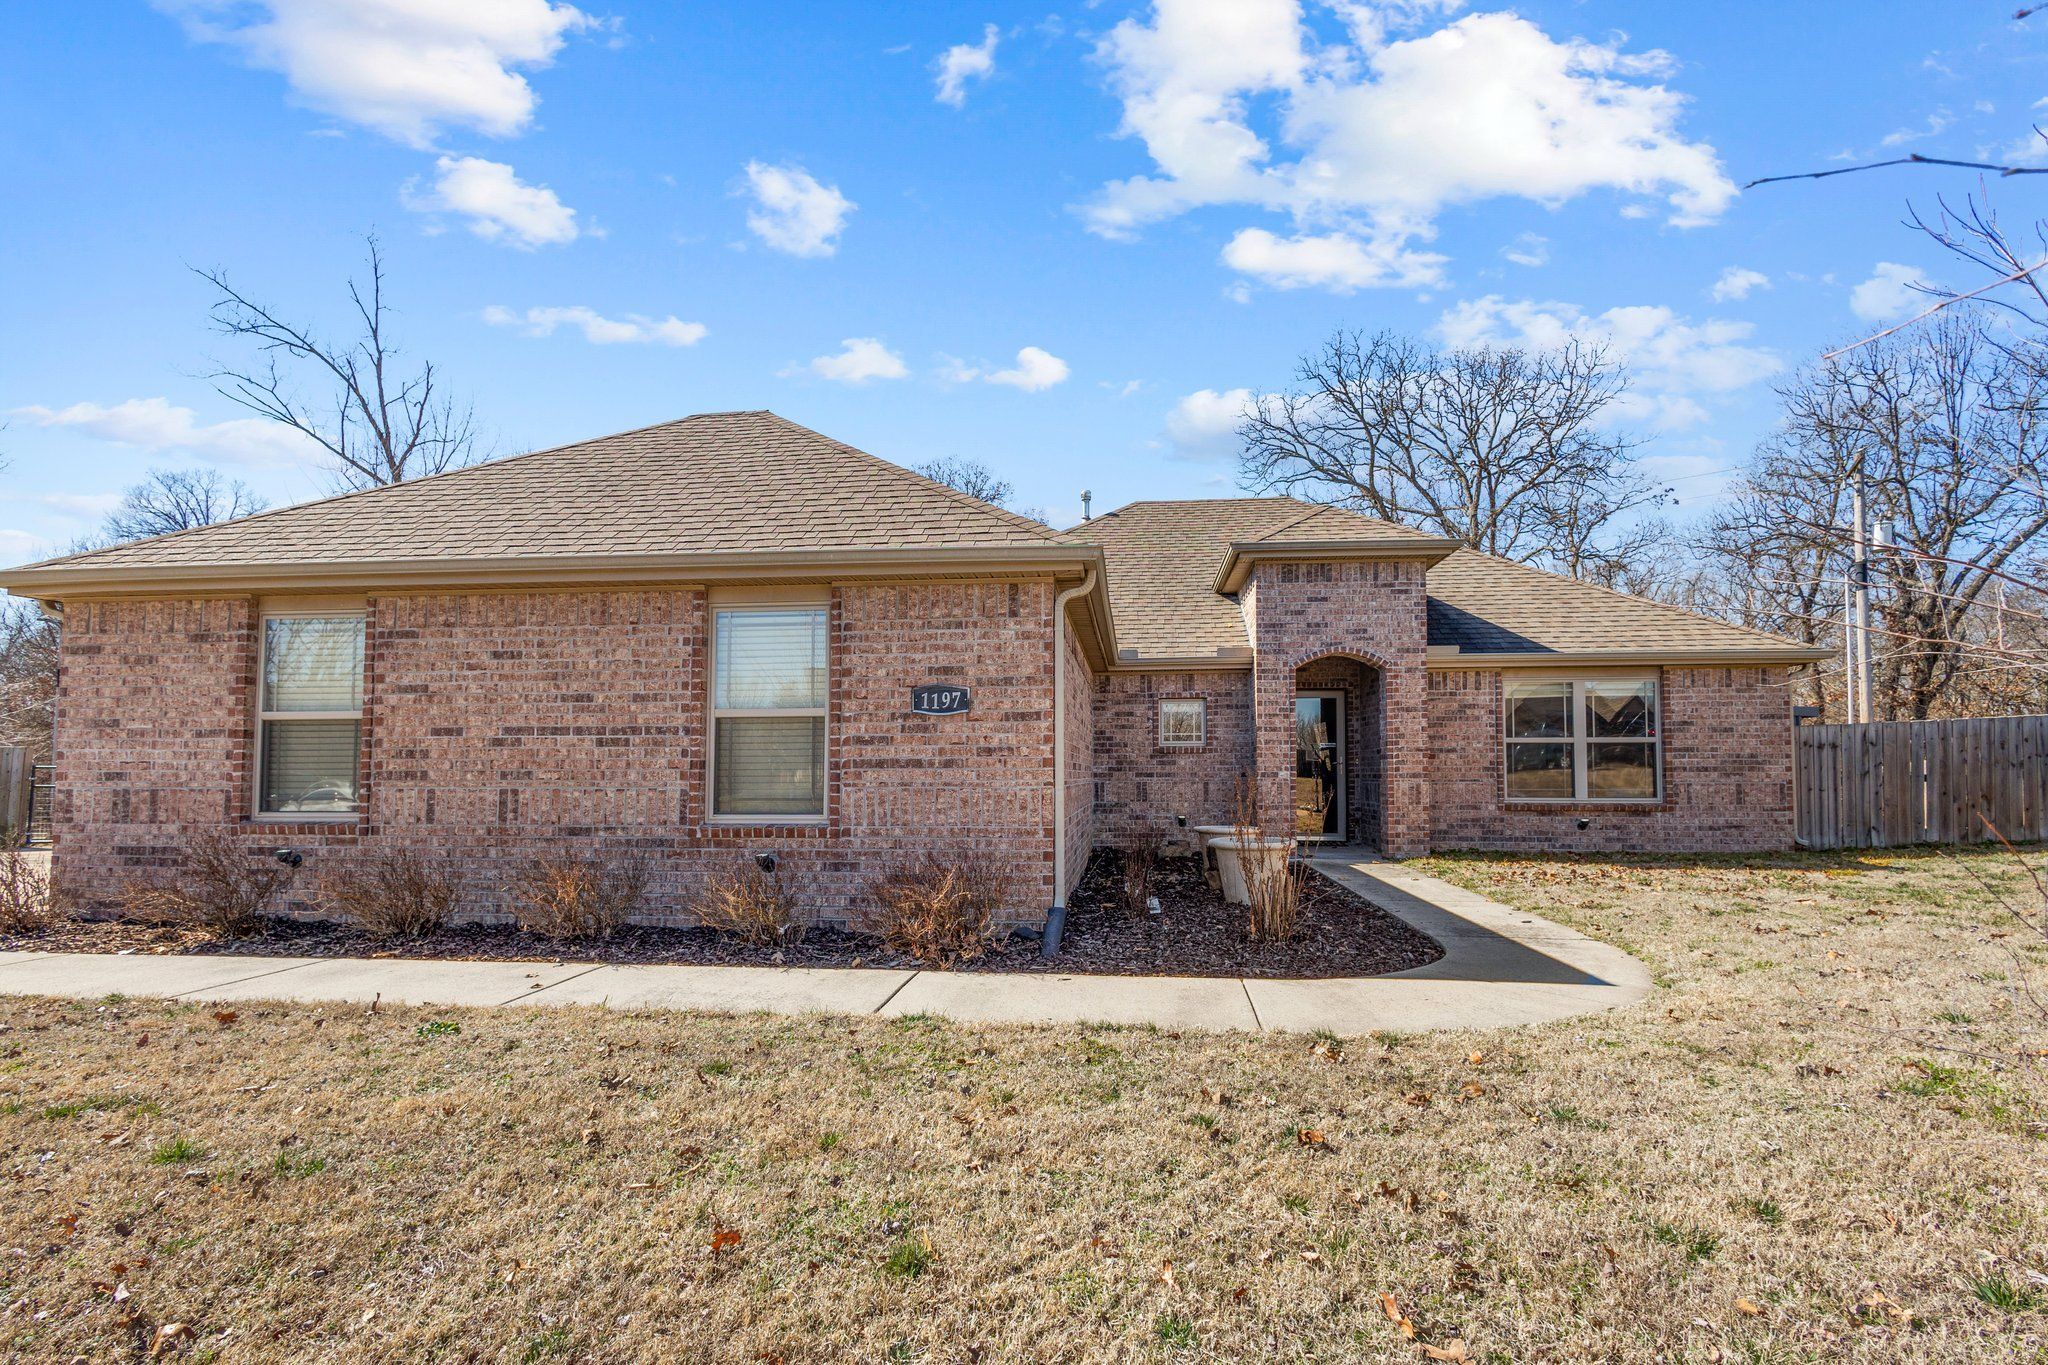 Sponsored Flyer Homes’ new listing in Pea Ridge offers two bedrooms, two baths, plus a penthouse for your feathered friends